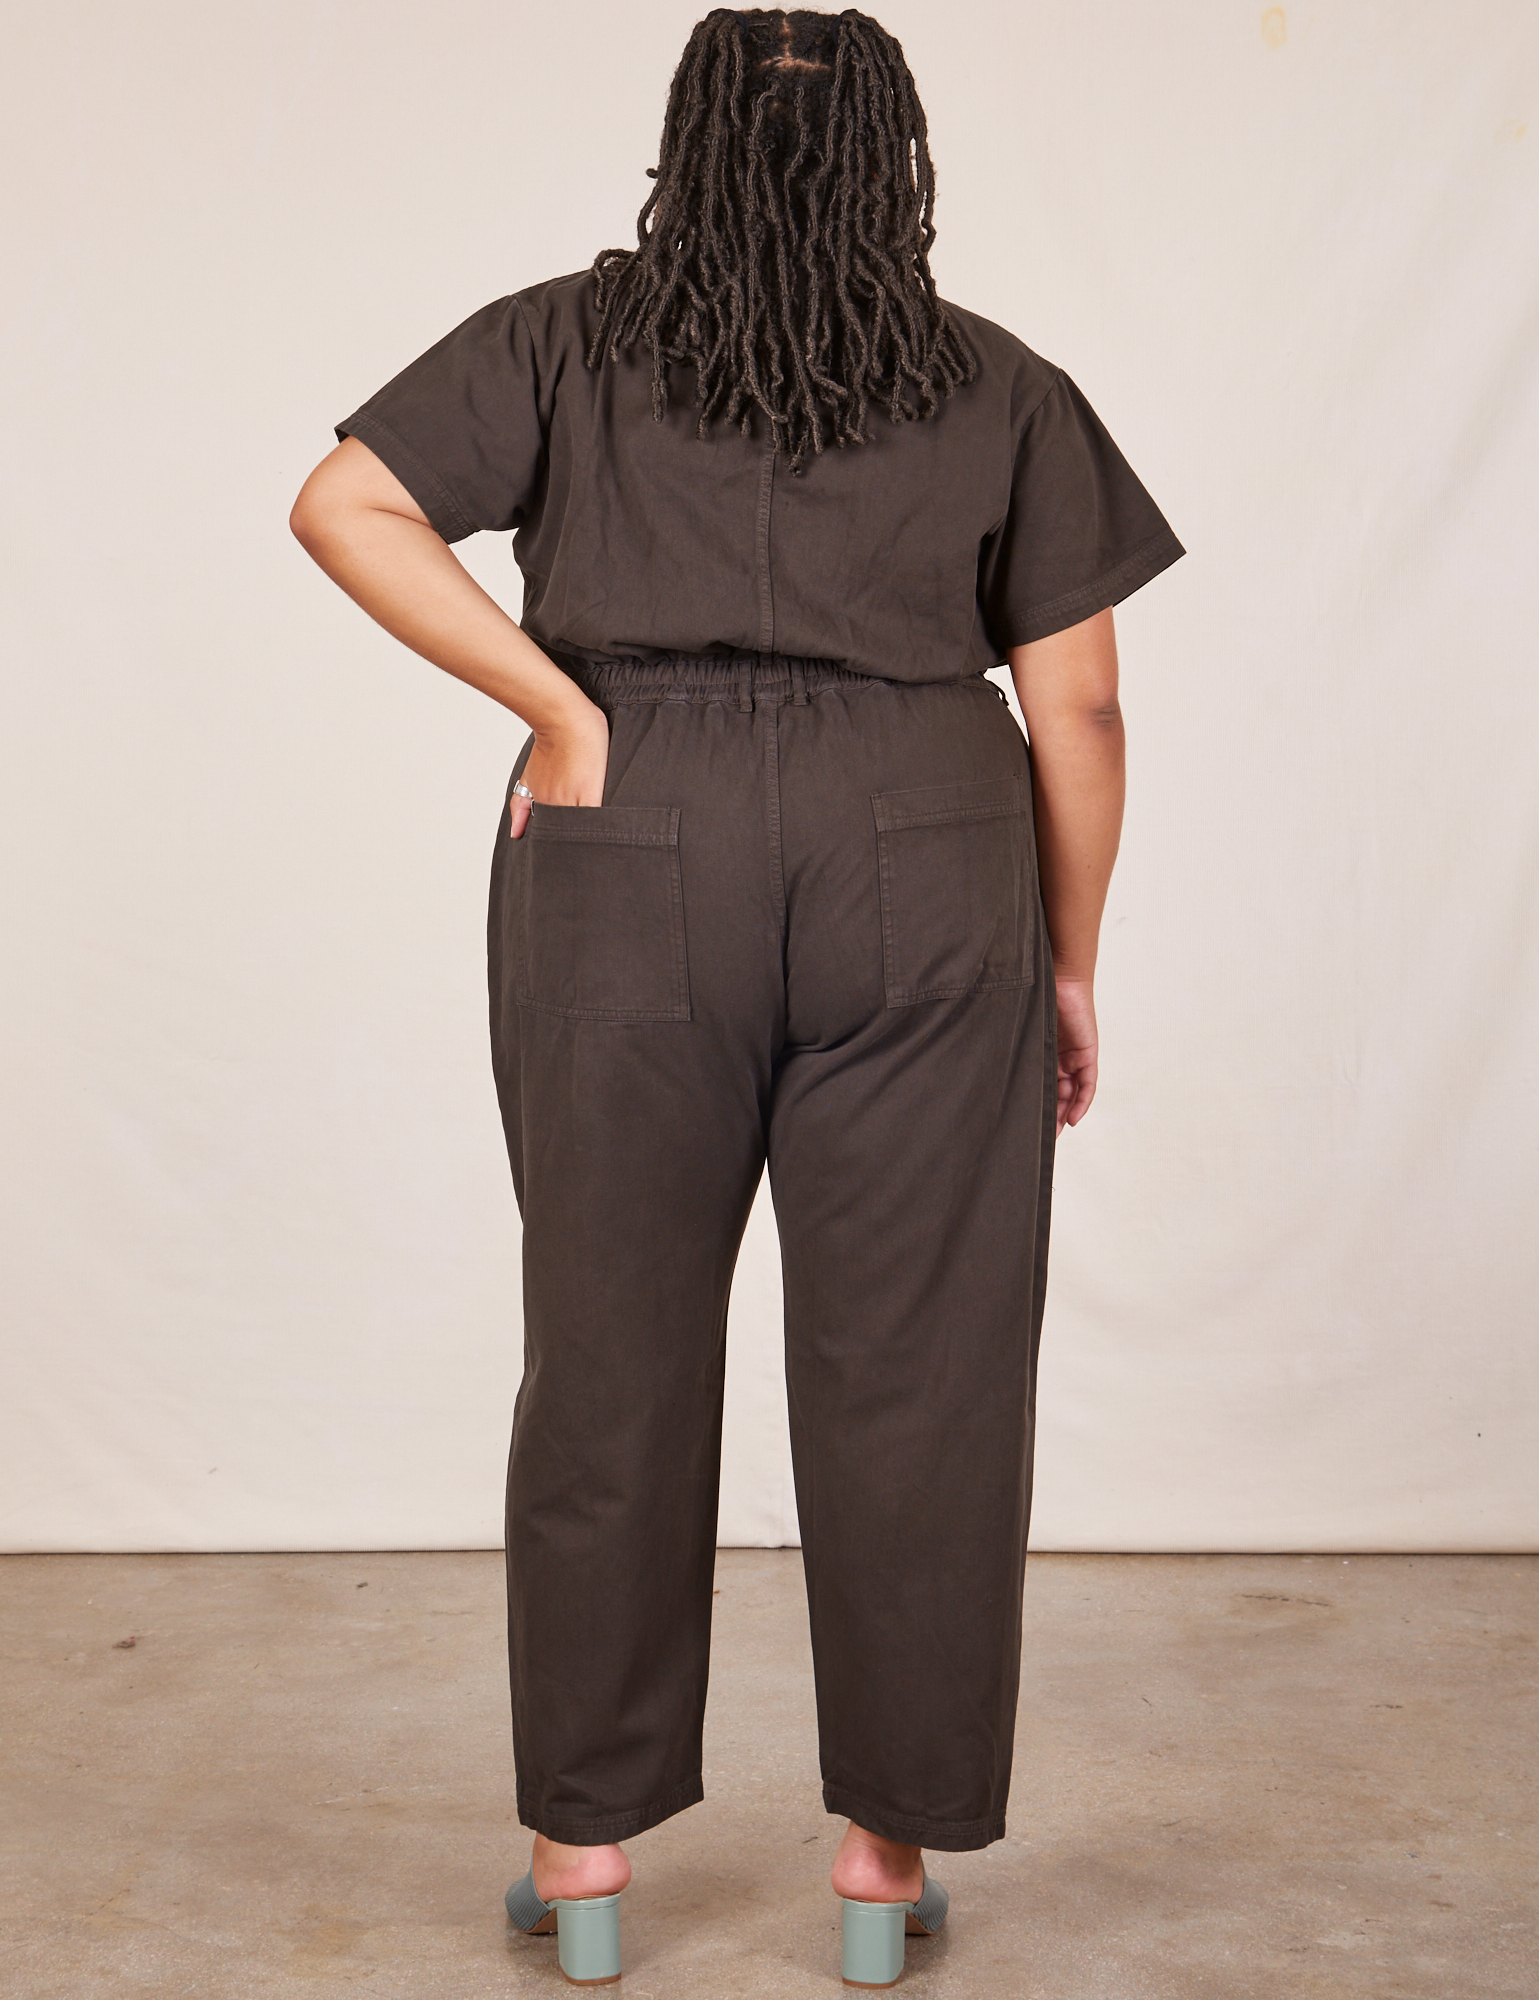 Back view of Short Sleeve Jumpsuit in Espresso Brown worn by Alicia